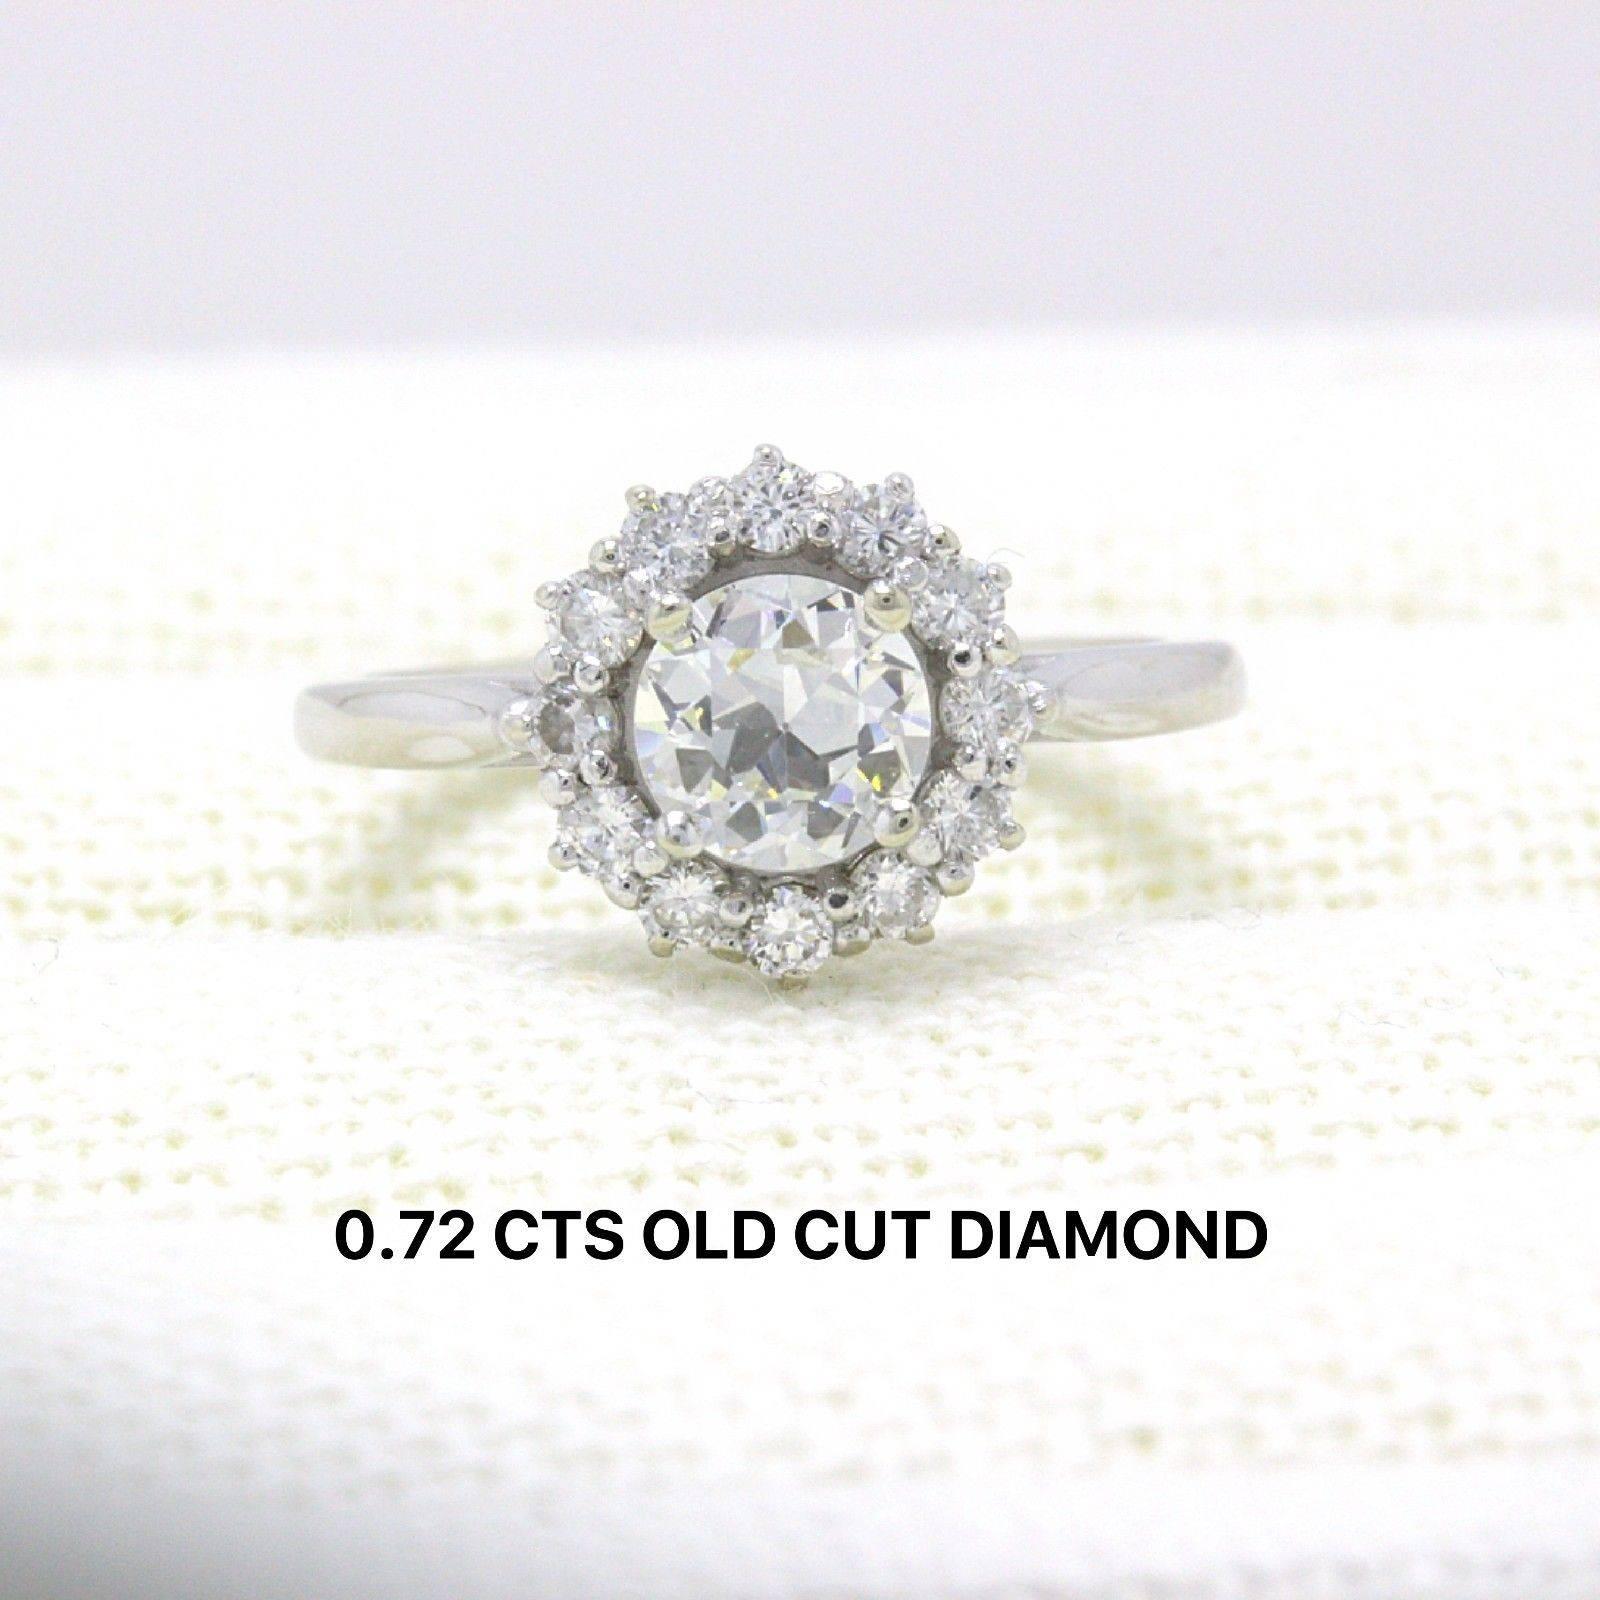 OLD CUT DIAMOND HALO ENGAGEMENT RING
Style: Halo
Metal: 18KT Yellow Gold
Size:   5.25 - Sizable
Total Carat Weight:  1.20 TCW
Diamond Shape:  Round Old Cut 0.72 CTS
Diamond Color & Clarity:   I / VS1 - VS2
Accent Diamonds:  12 Round Diamonds 0.48